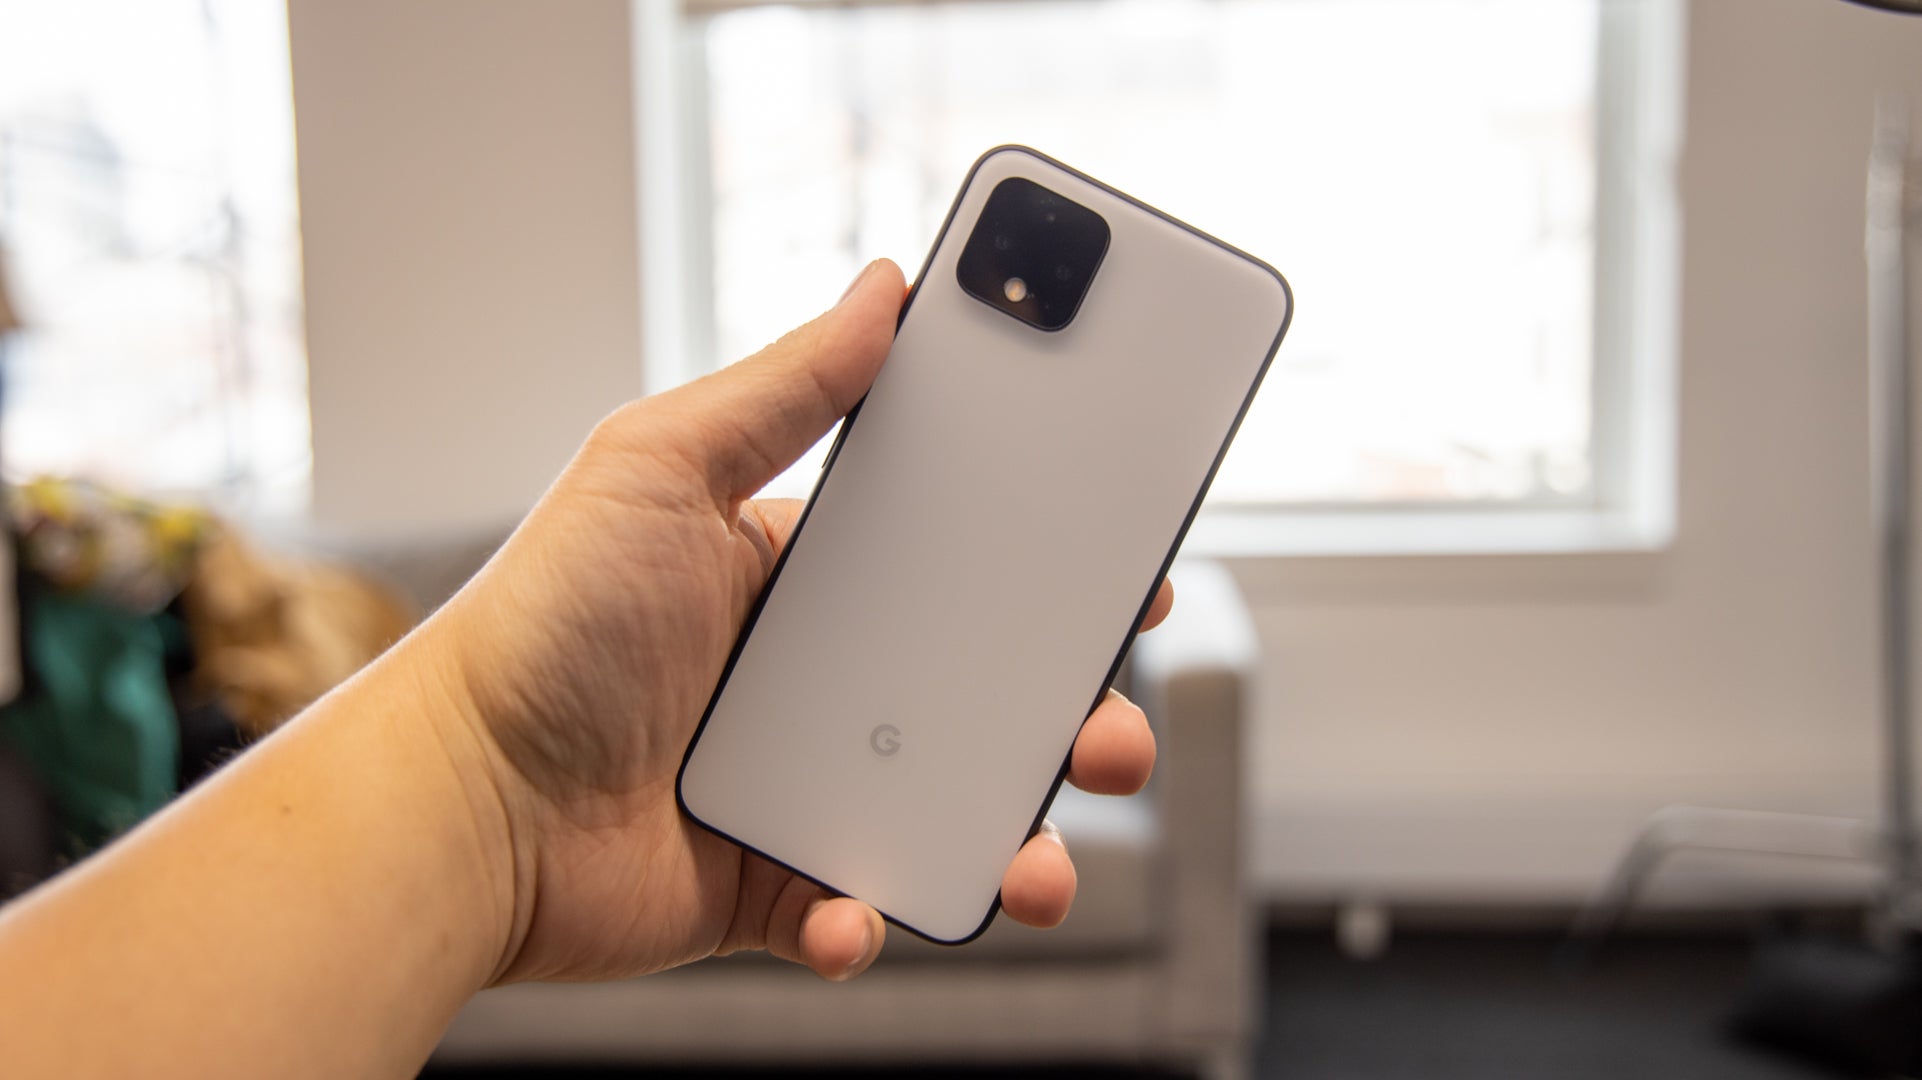 Accessing Developer Options On Google Pixel 4 XL: Step-by-Step Guide